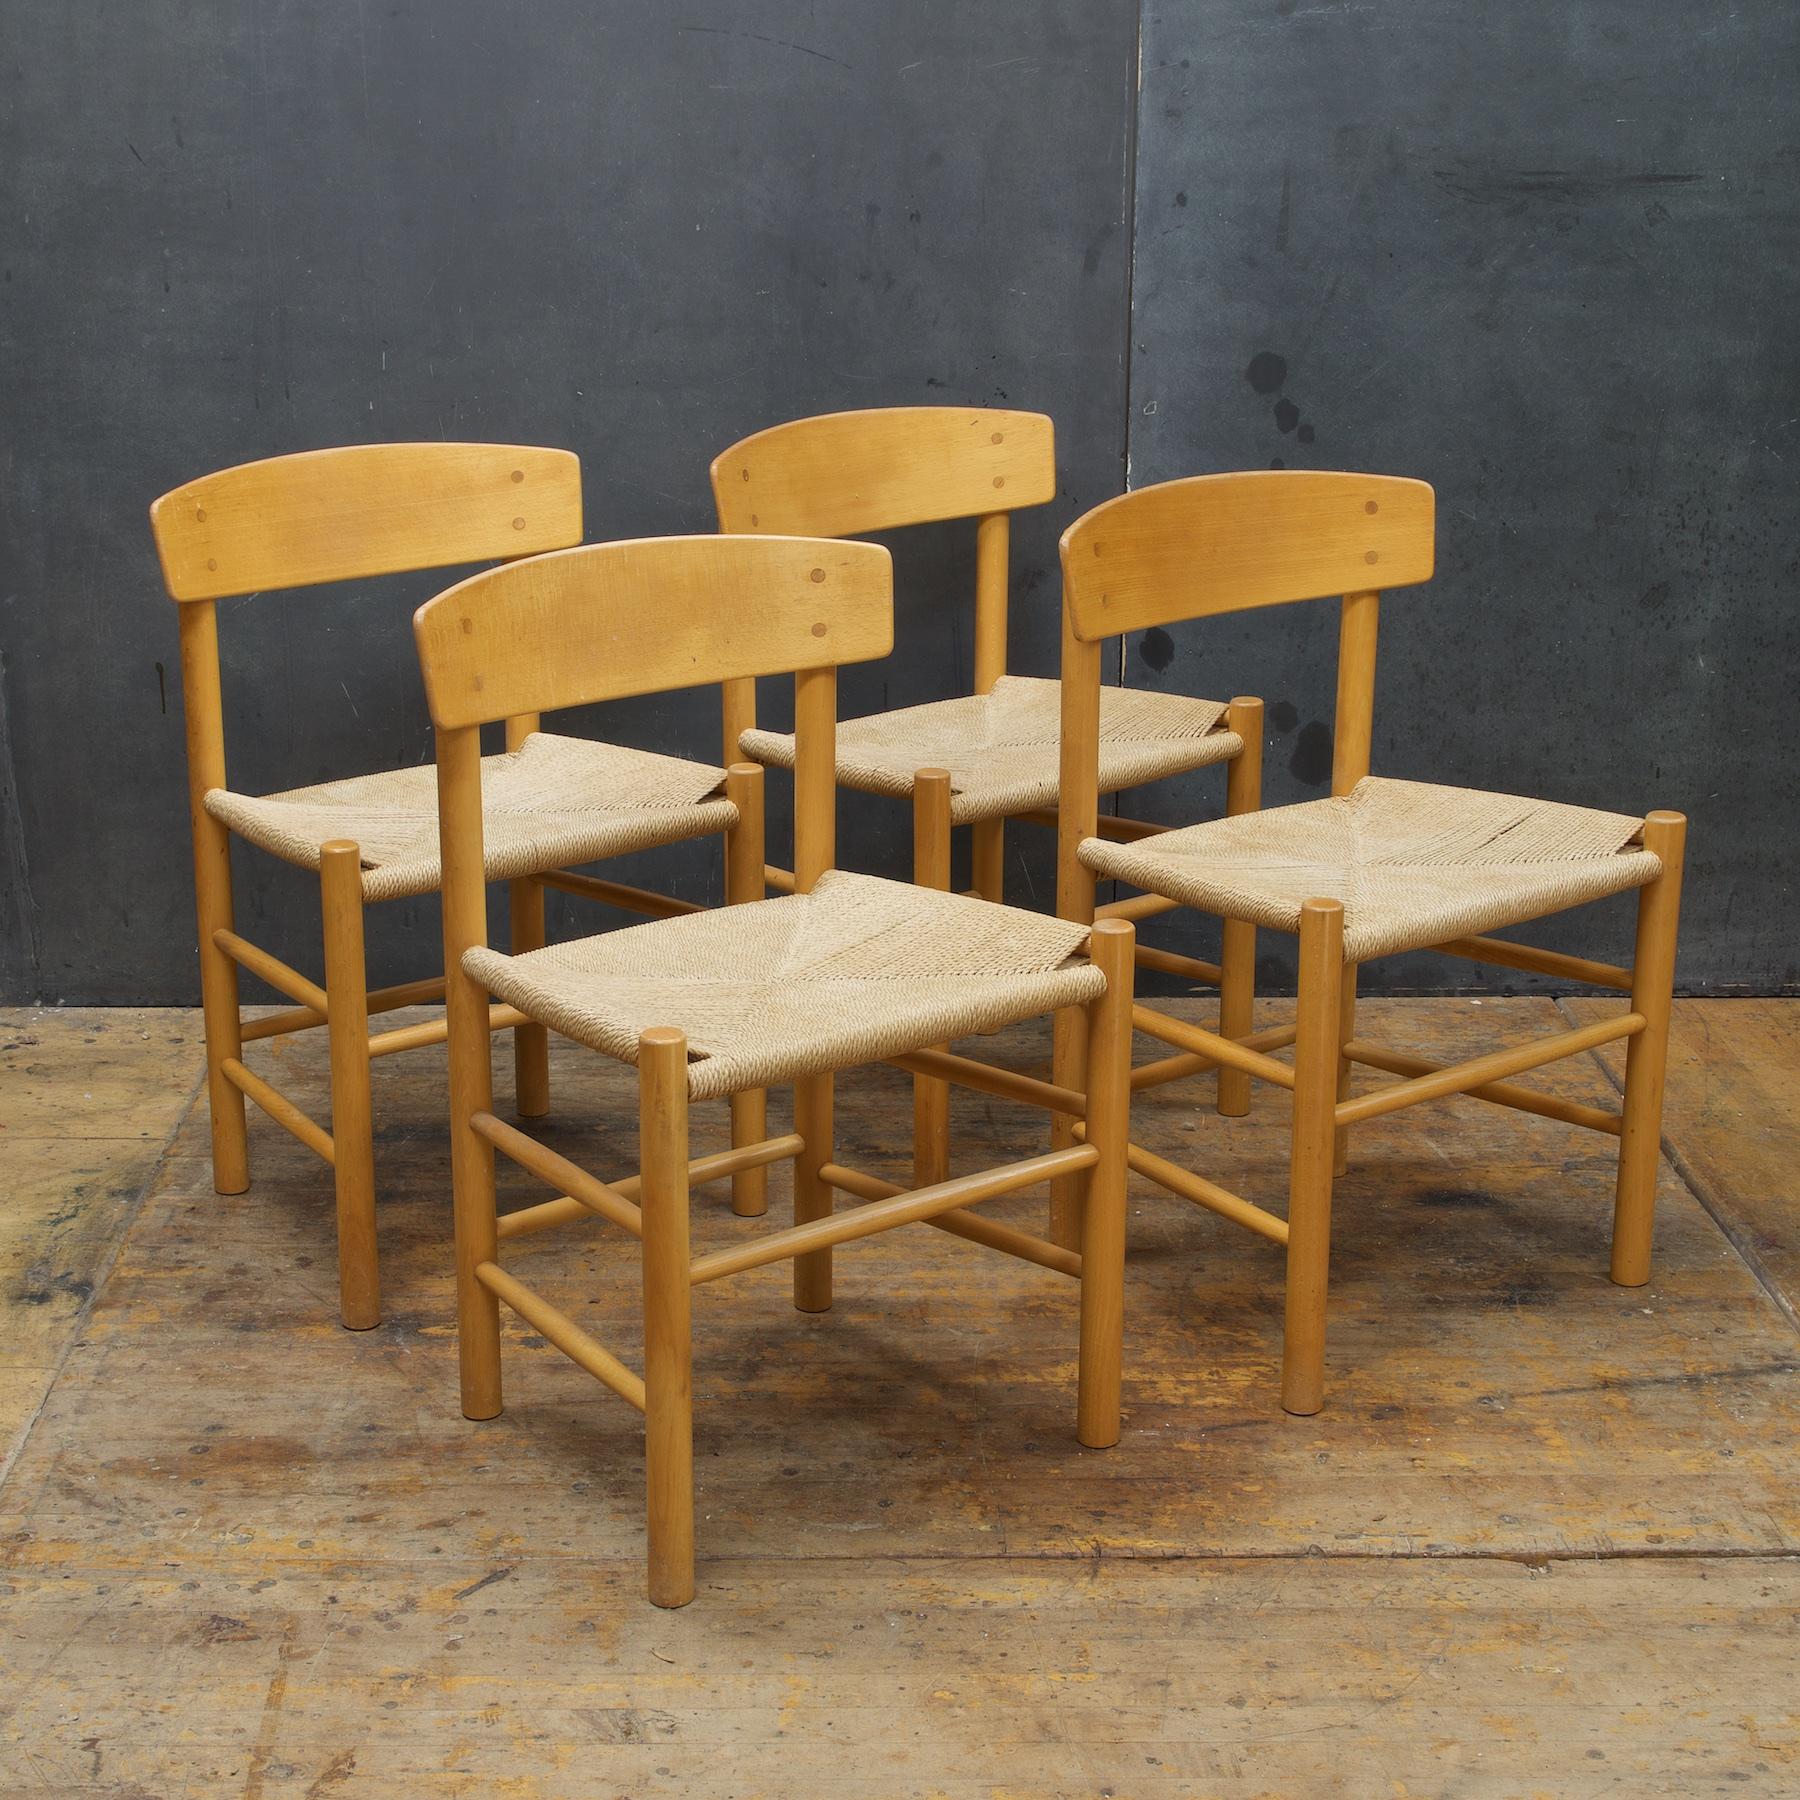 Fun, rustic Set. Sturdy and usable, cord is lightly stained, soiled, and worn. All seat cord remains unbroken and strong. FDB Model J39 Baltic birch and cord (Rope/Rush) dining side chairs.
 